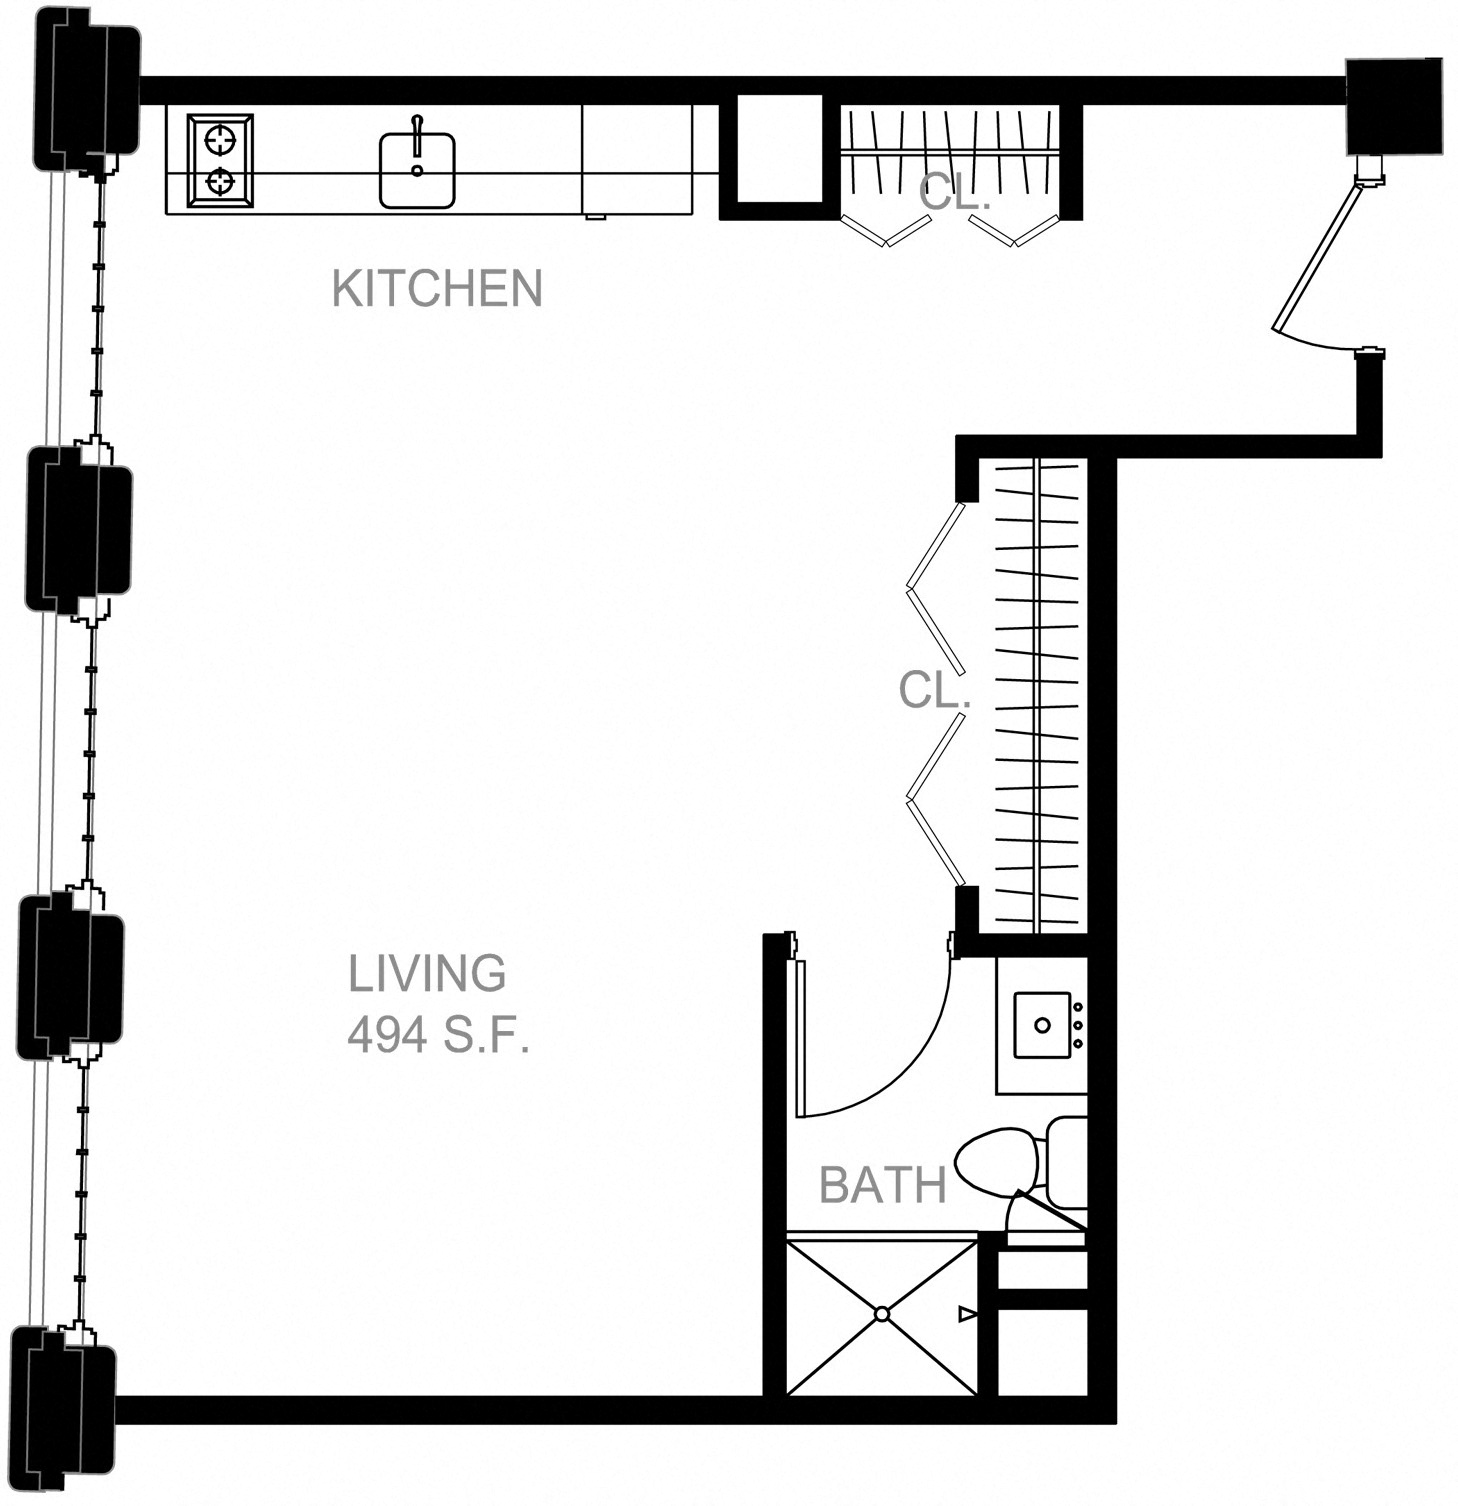 Floorplan for Apartment #S2605, 0 bedroom unit at Halstead Providence